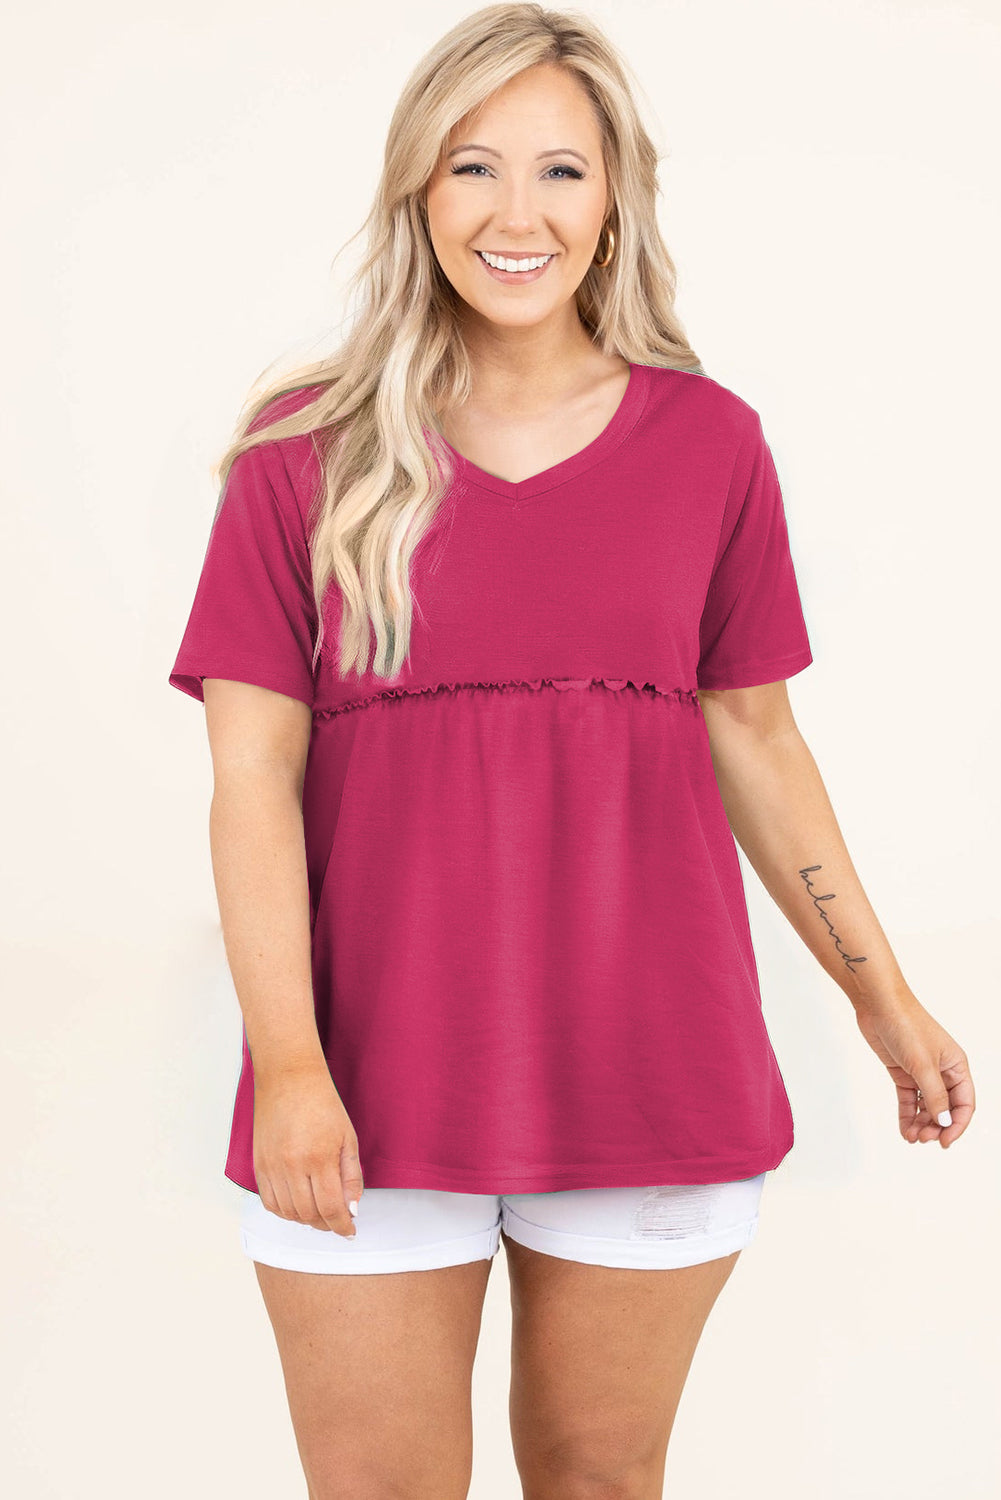 Rose Red Solid Color Short Sleeve Flowy Plus Size Top